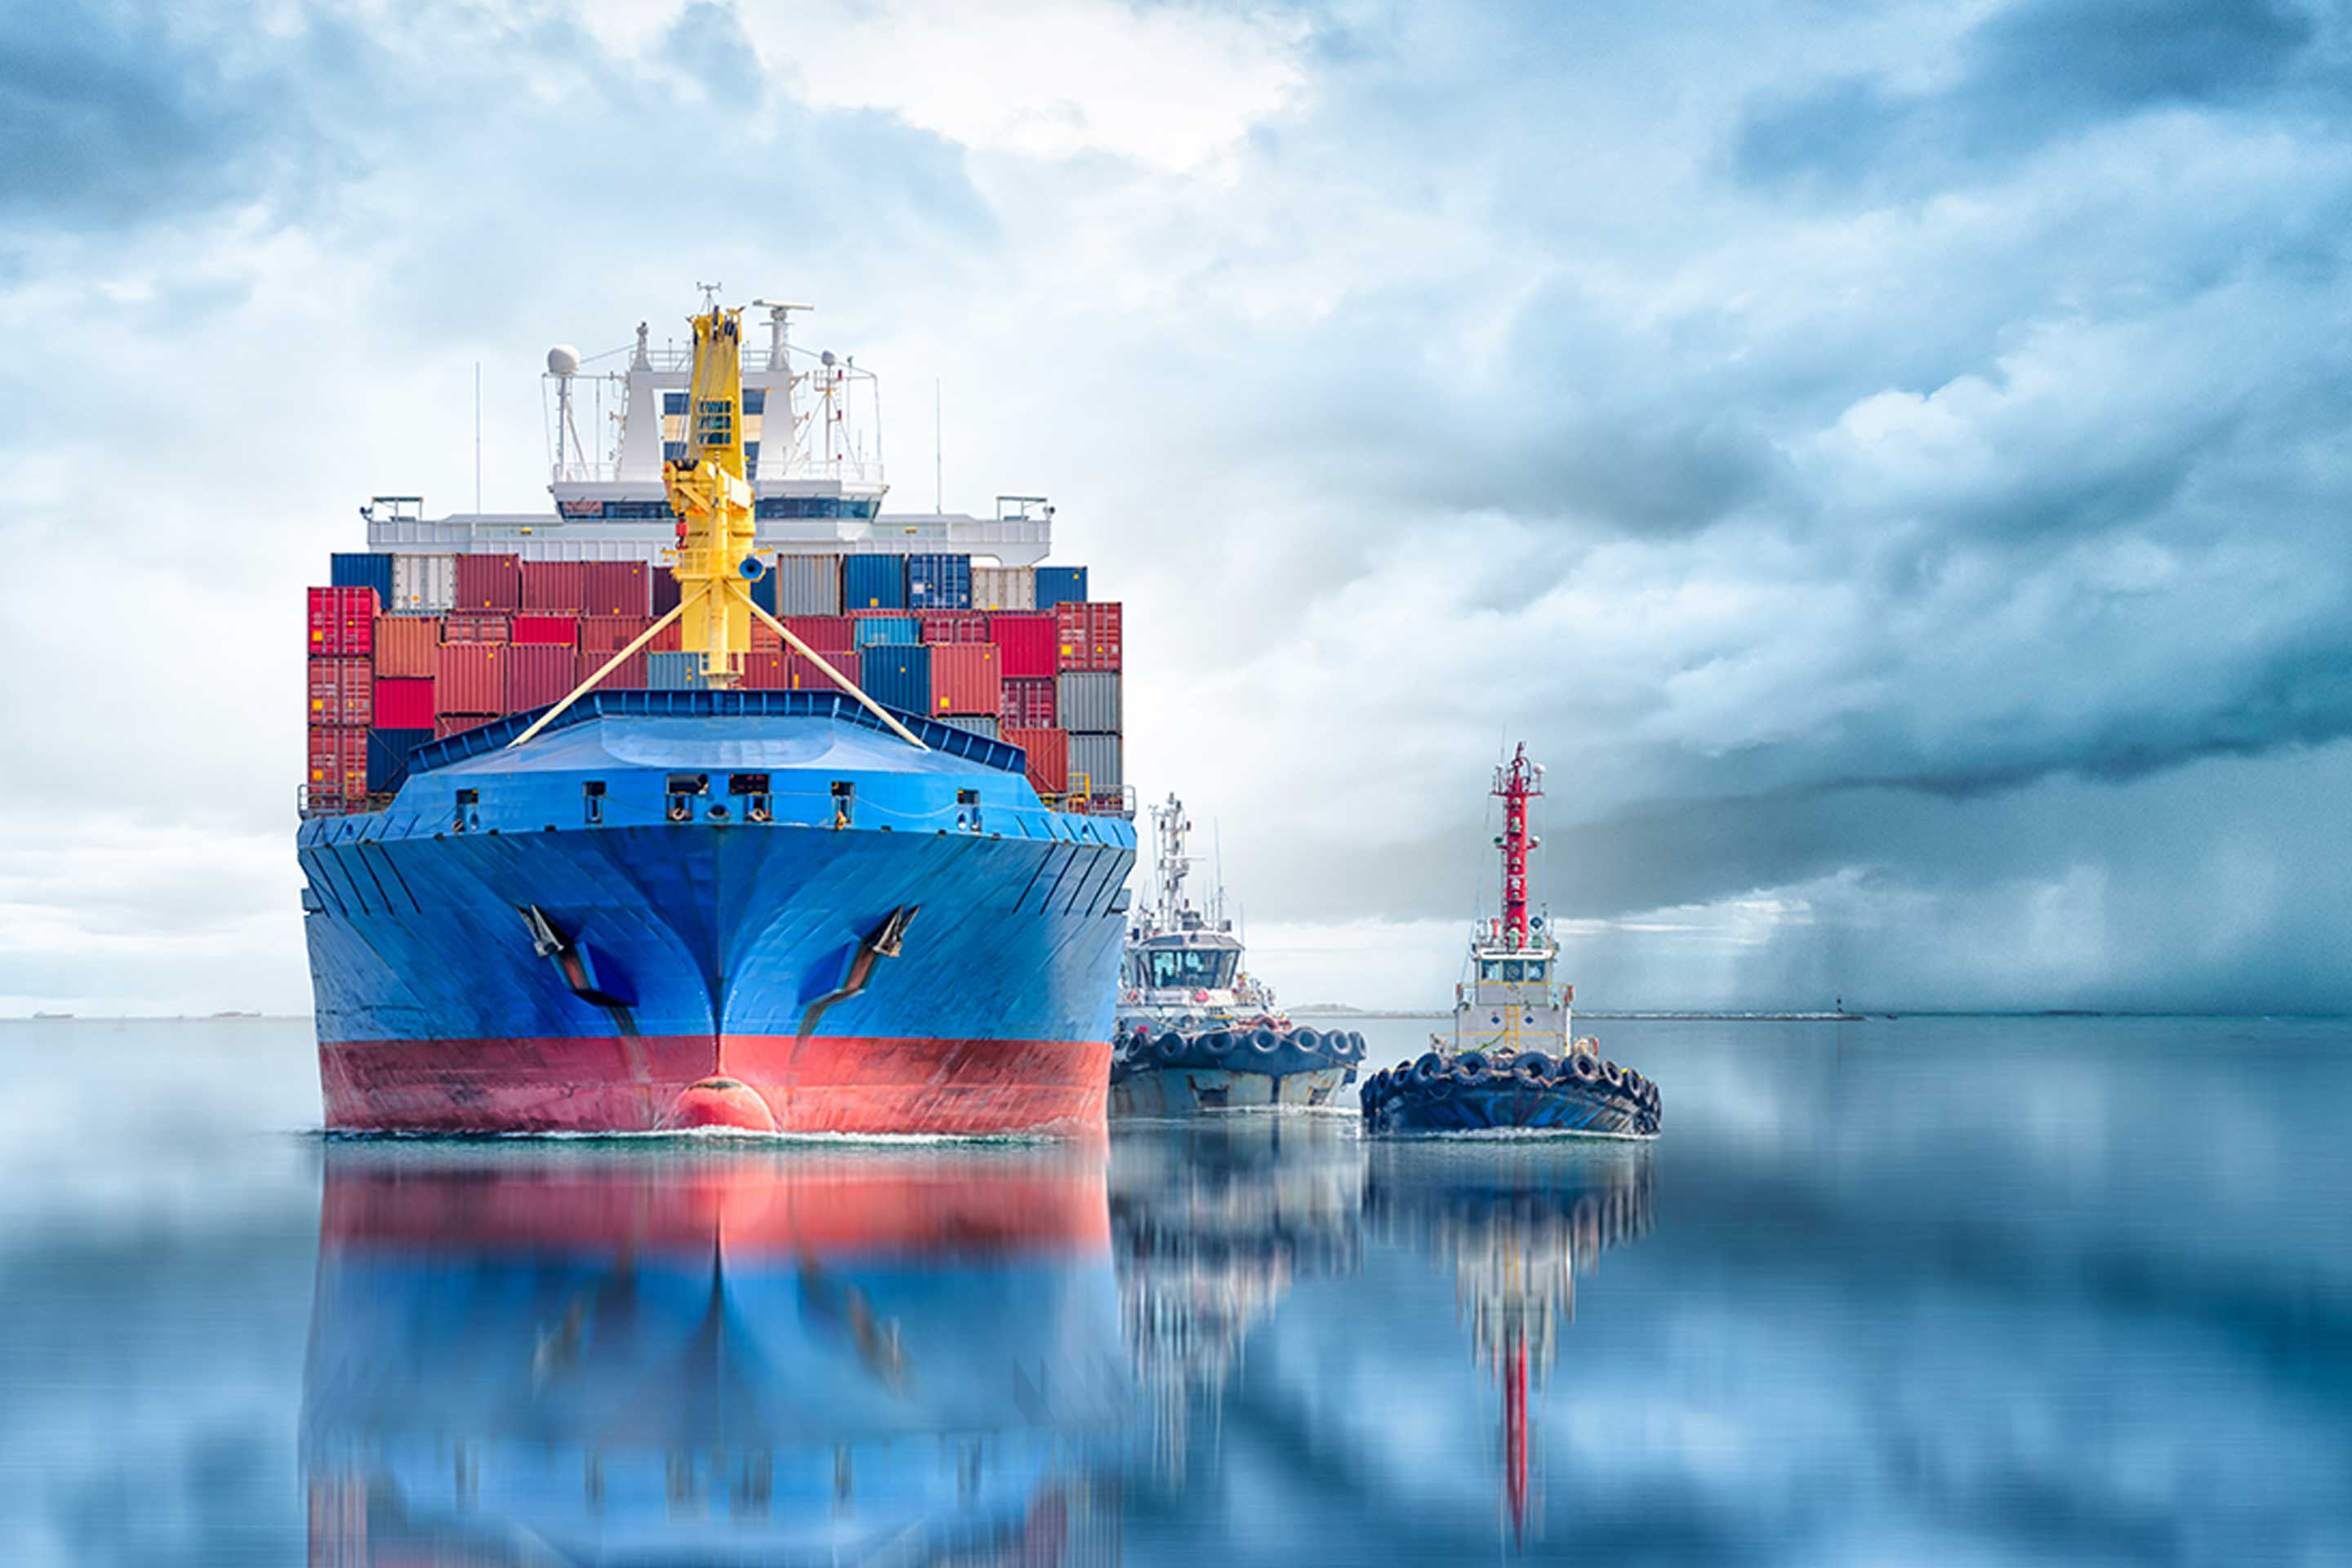 An image of a container ship and tug boats to highlight the Accelleron ship owners survey